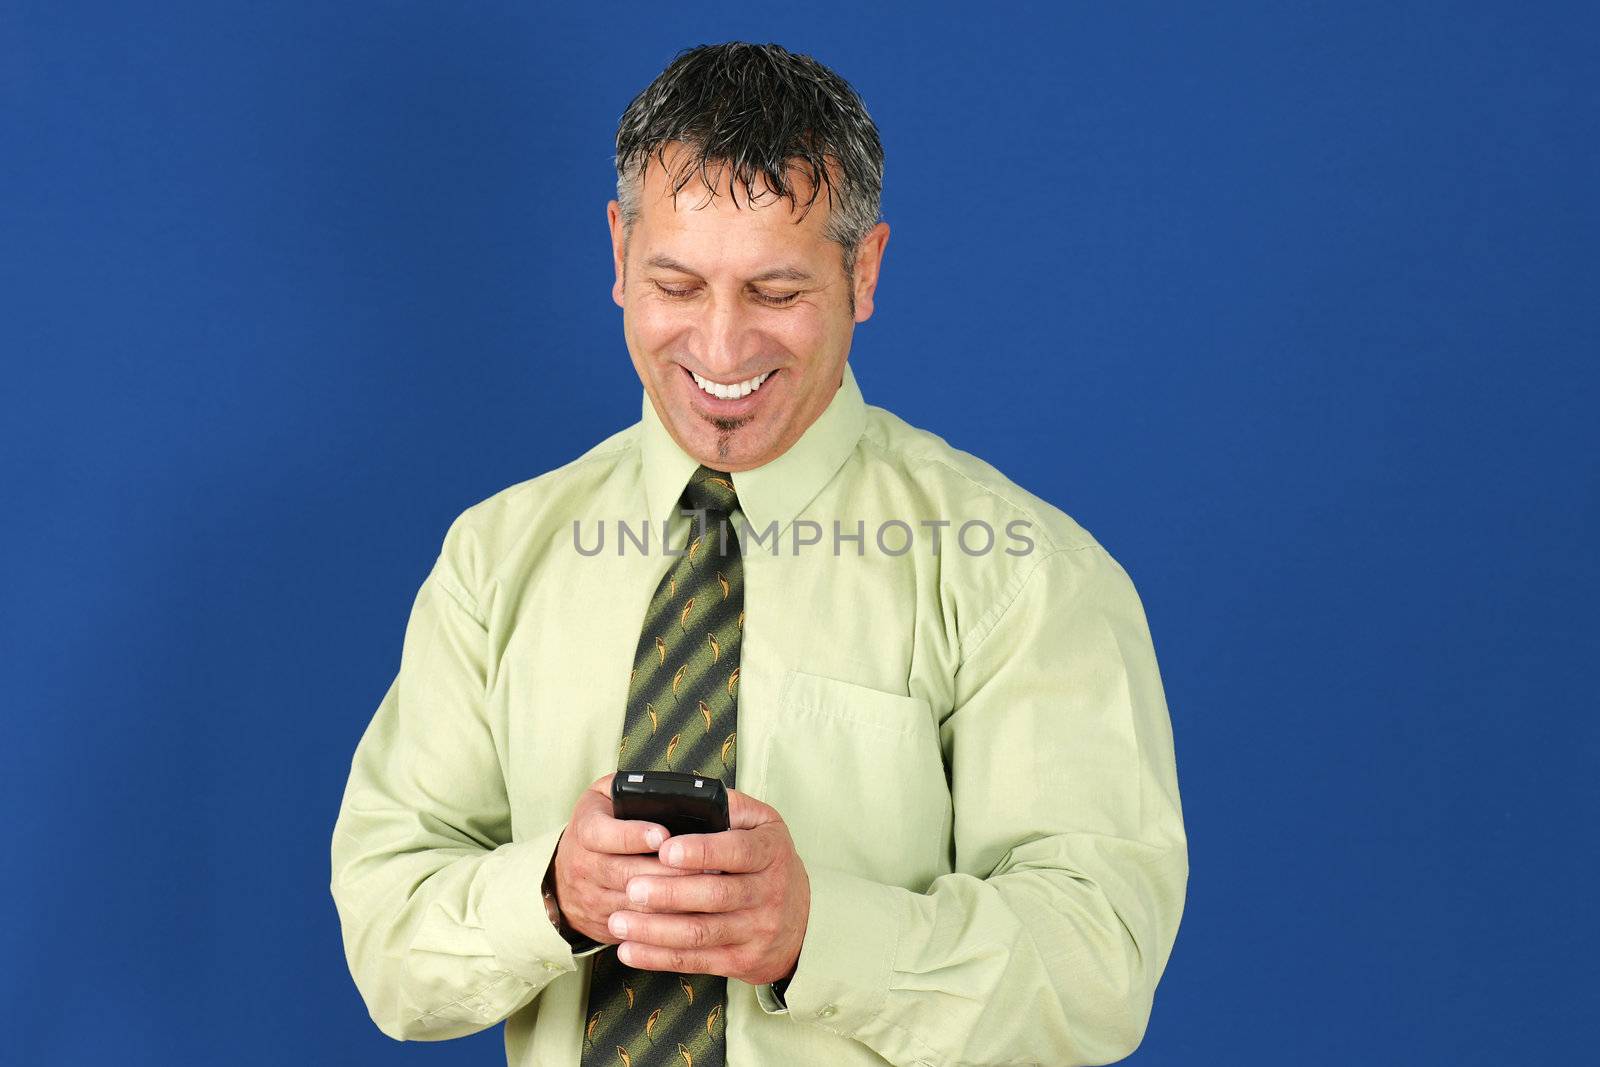 Business man texting on cell phone by Mirage3